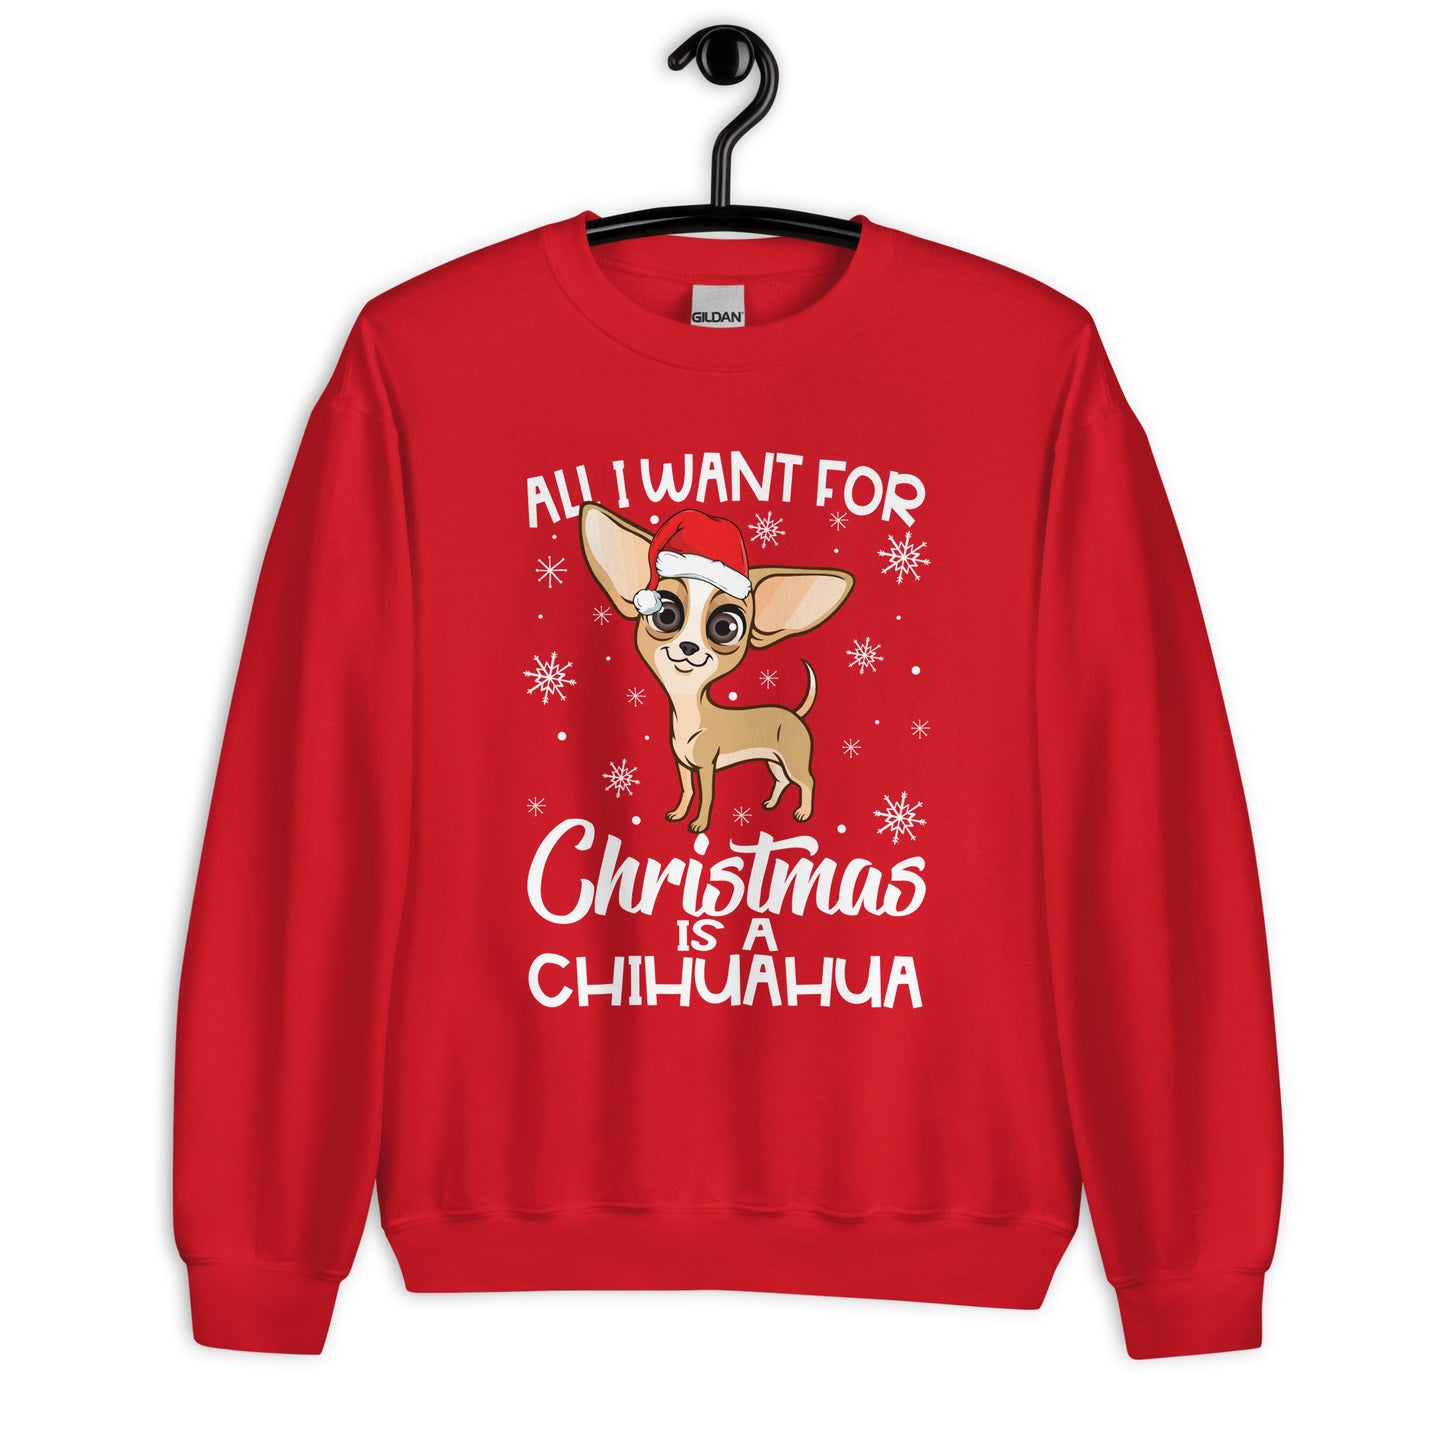 All I Want for Christmas is Chihuahua Sweatshirt